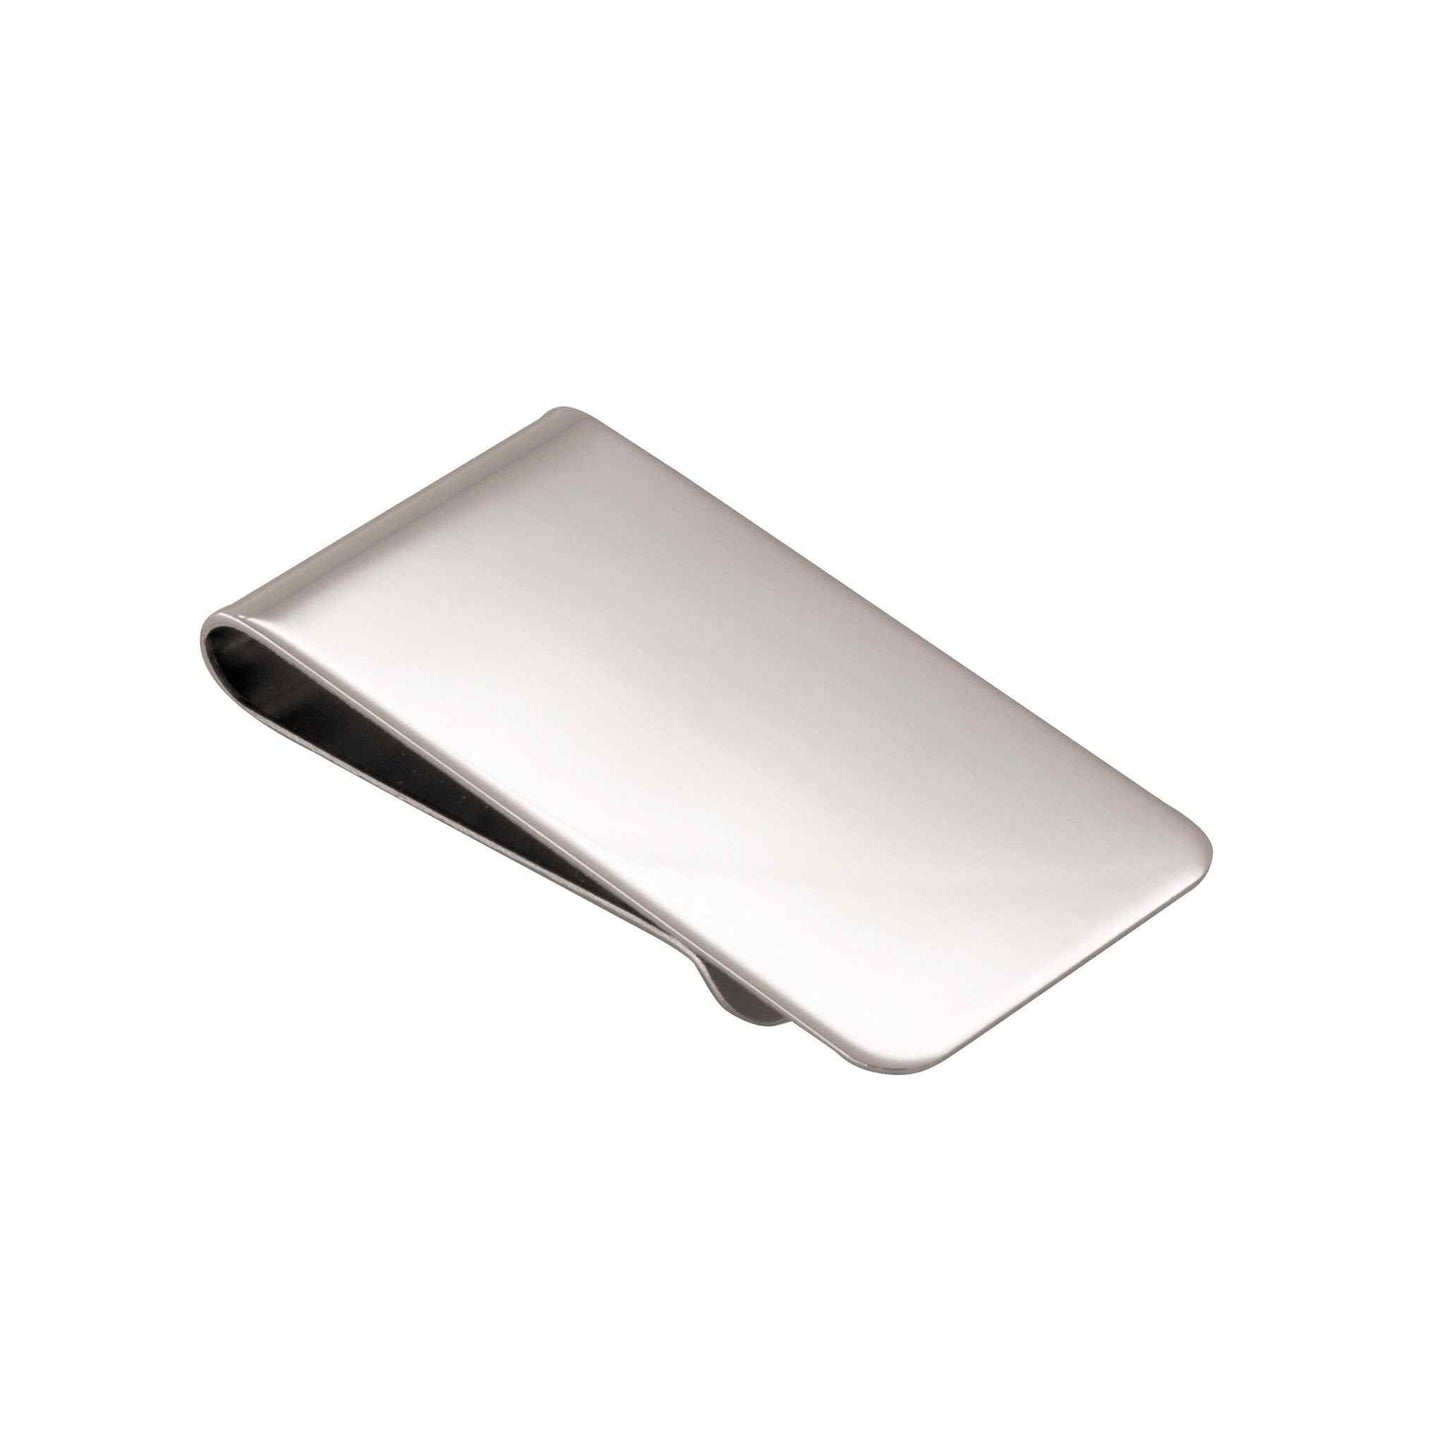 A classic money clip displayed on a neutral white background.